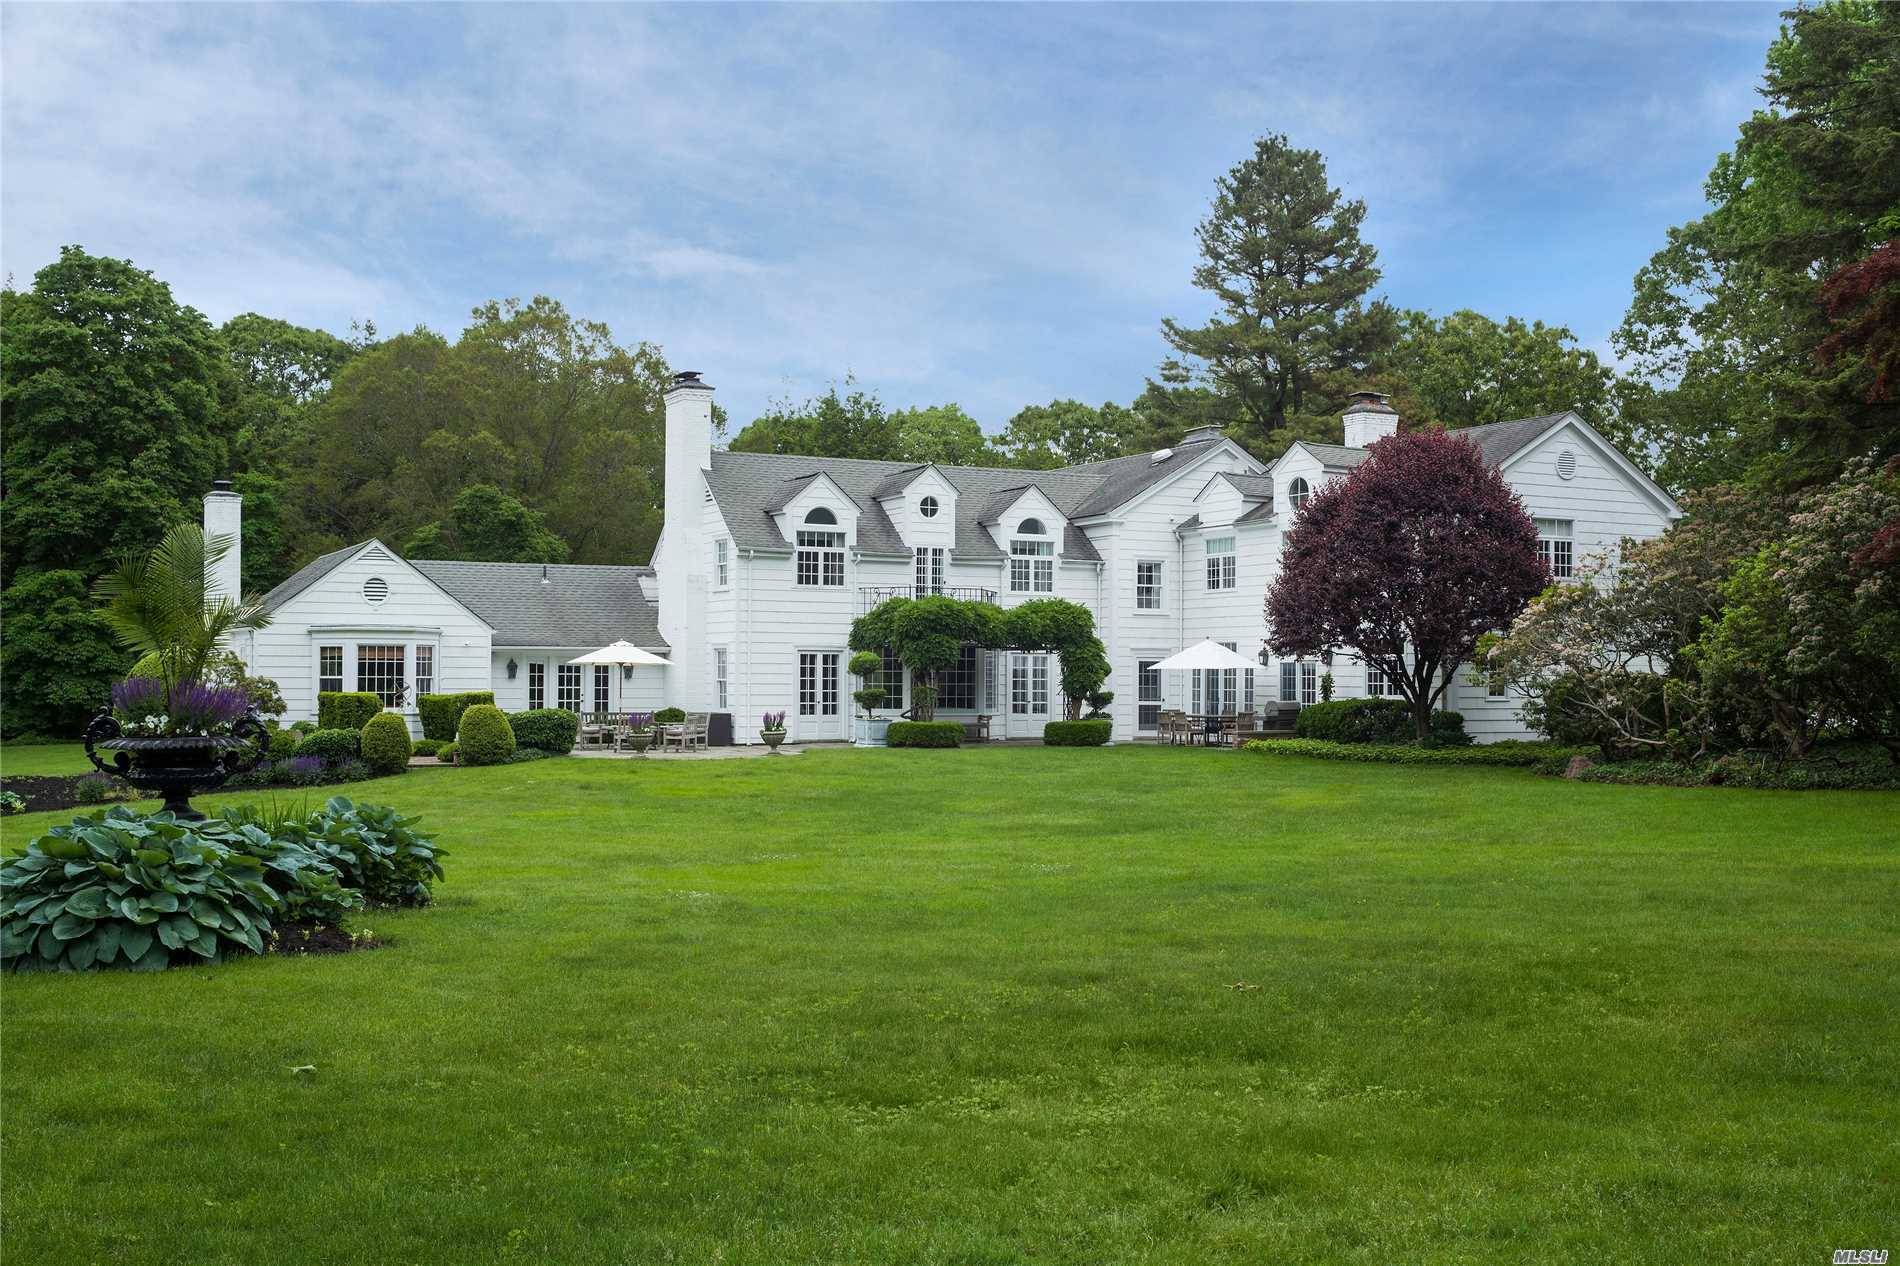 Quintessential country estate on over six acres in the heart of Matinecock.